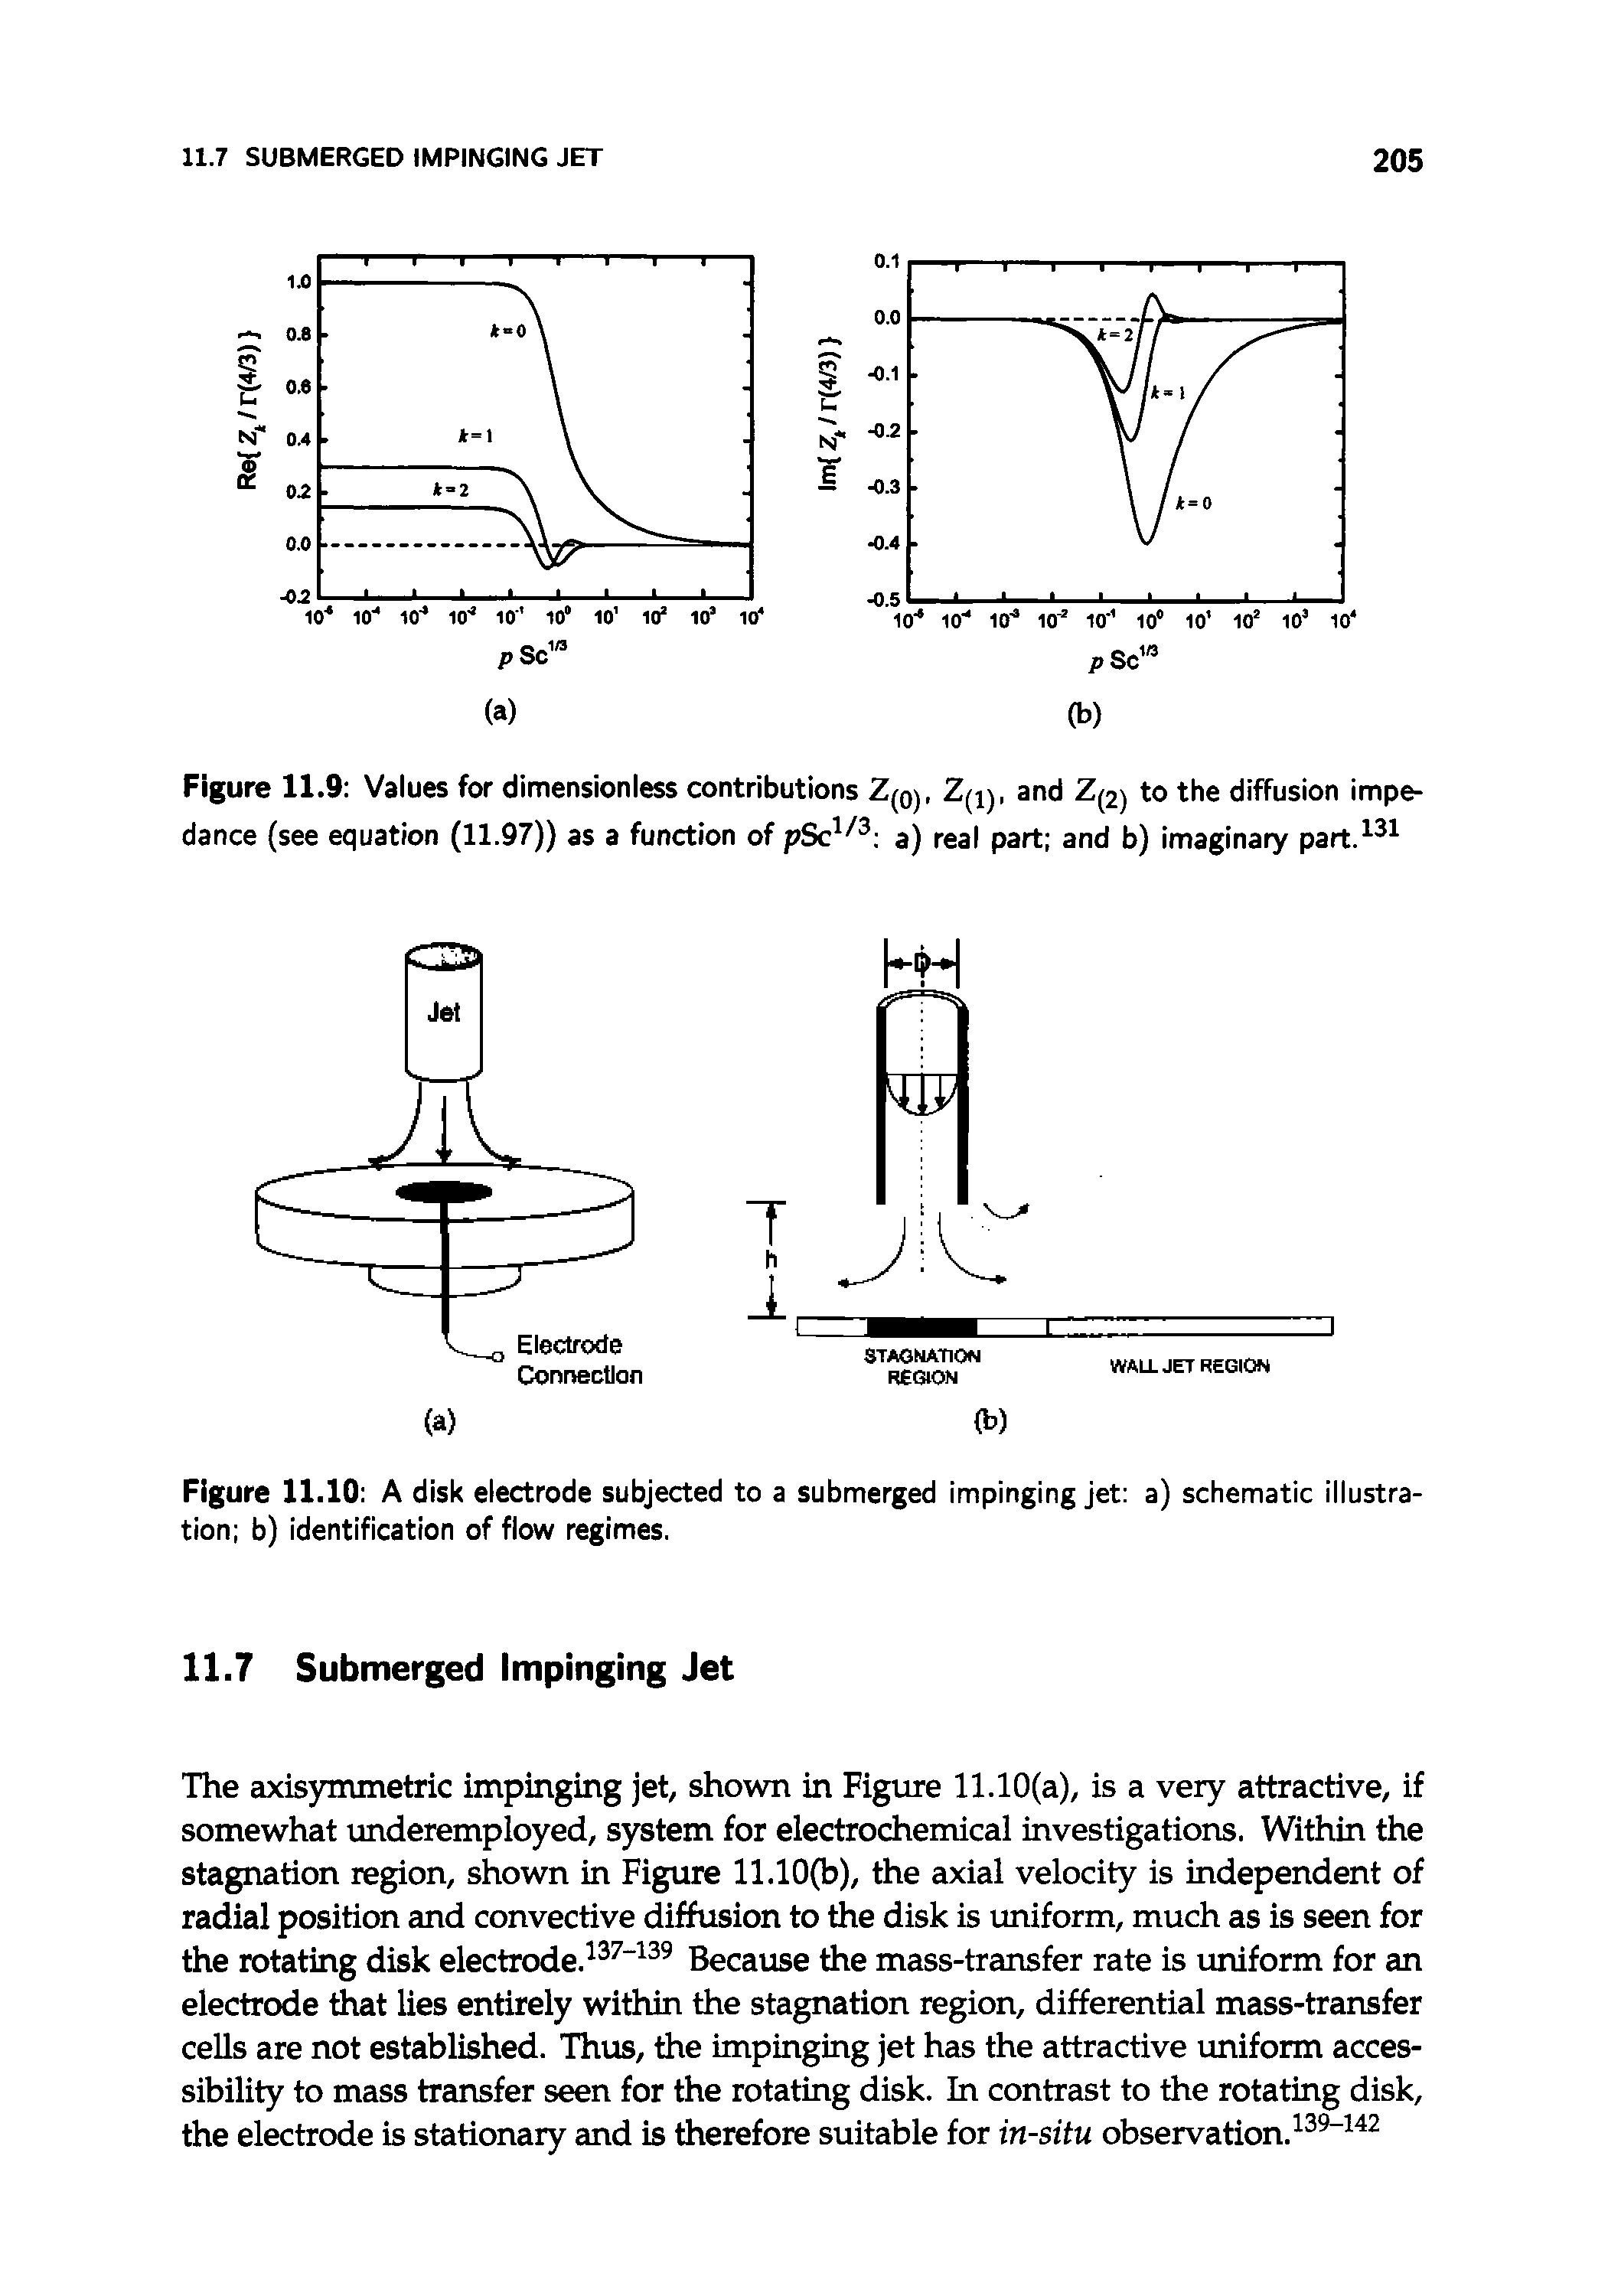 Figure 11.10 A disk electrode subjected to a submerged impinging jet a) schematic illustration b) identification of flow regimes.